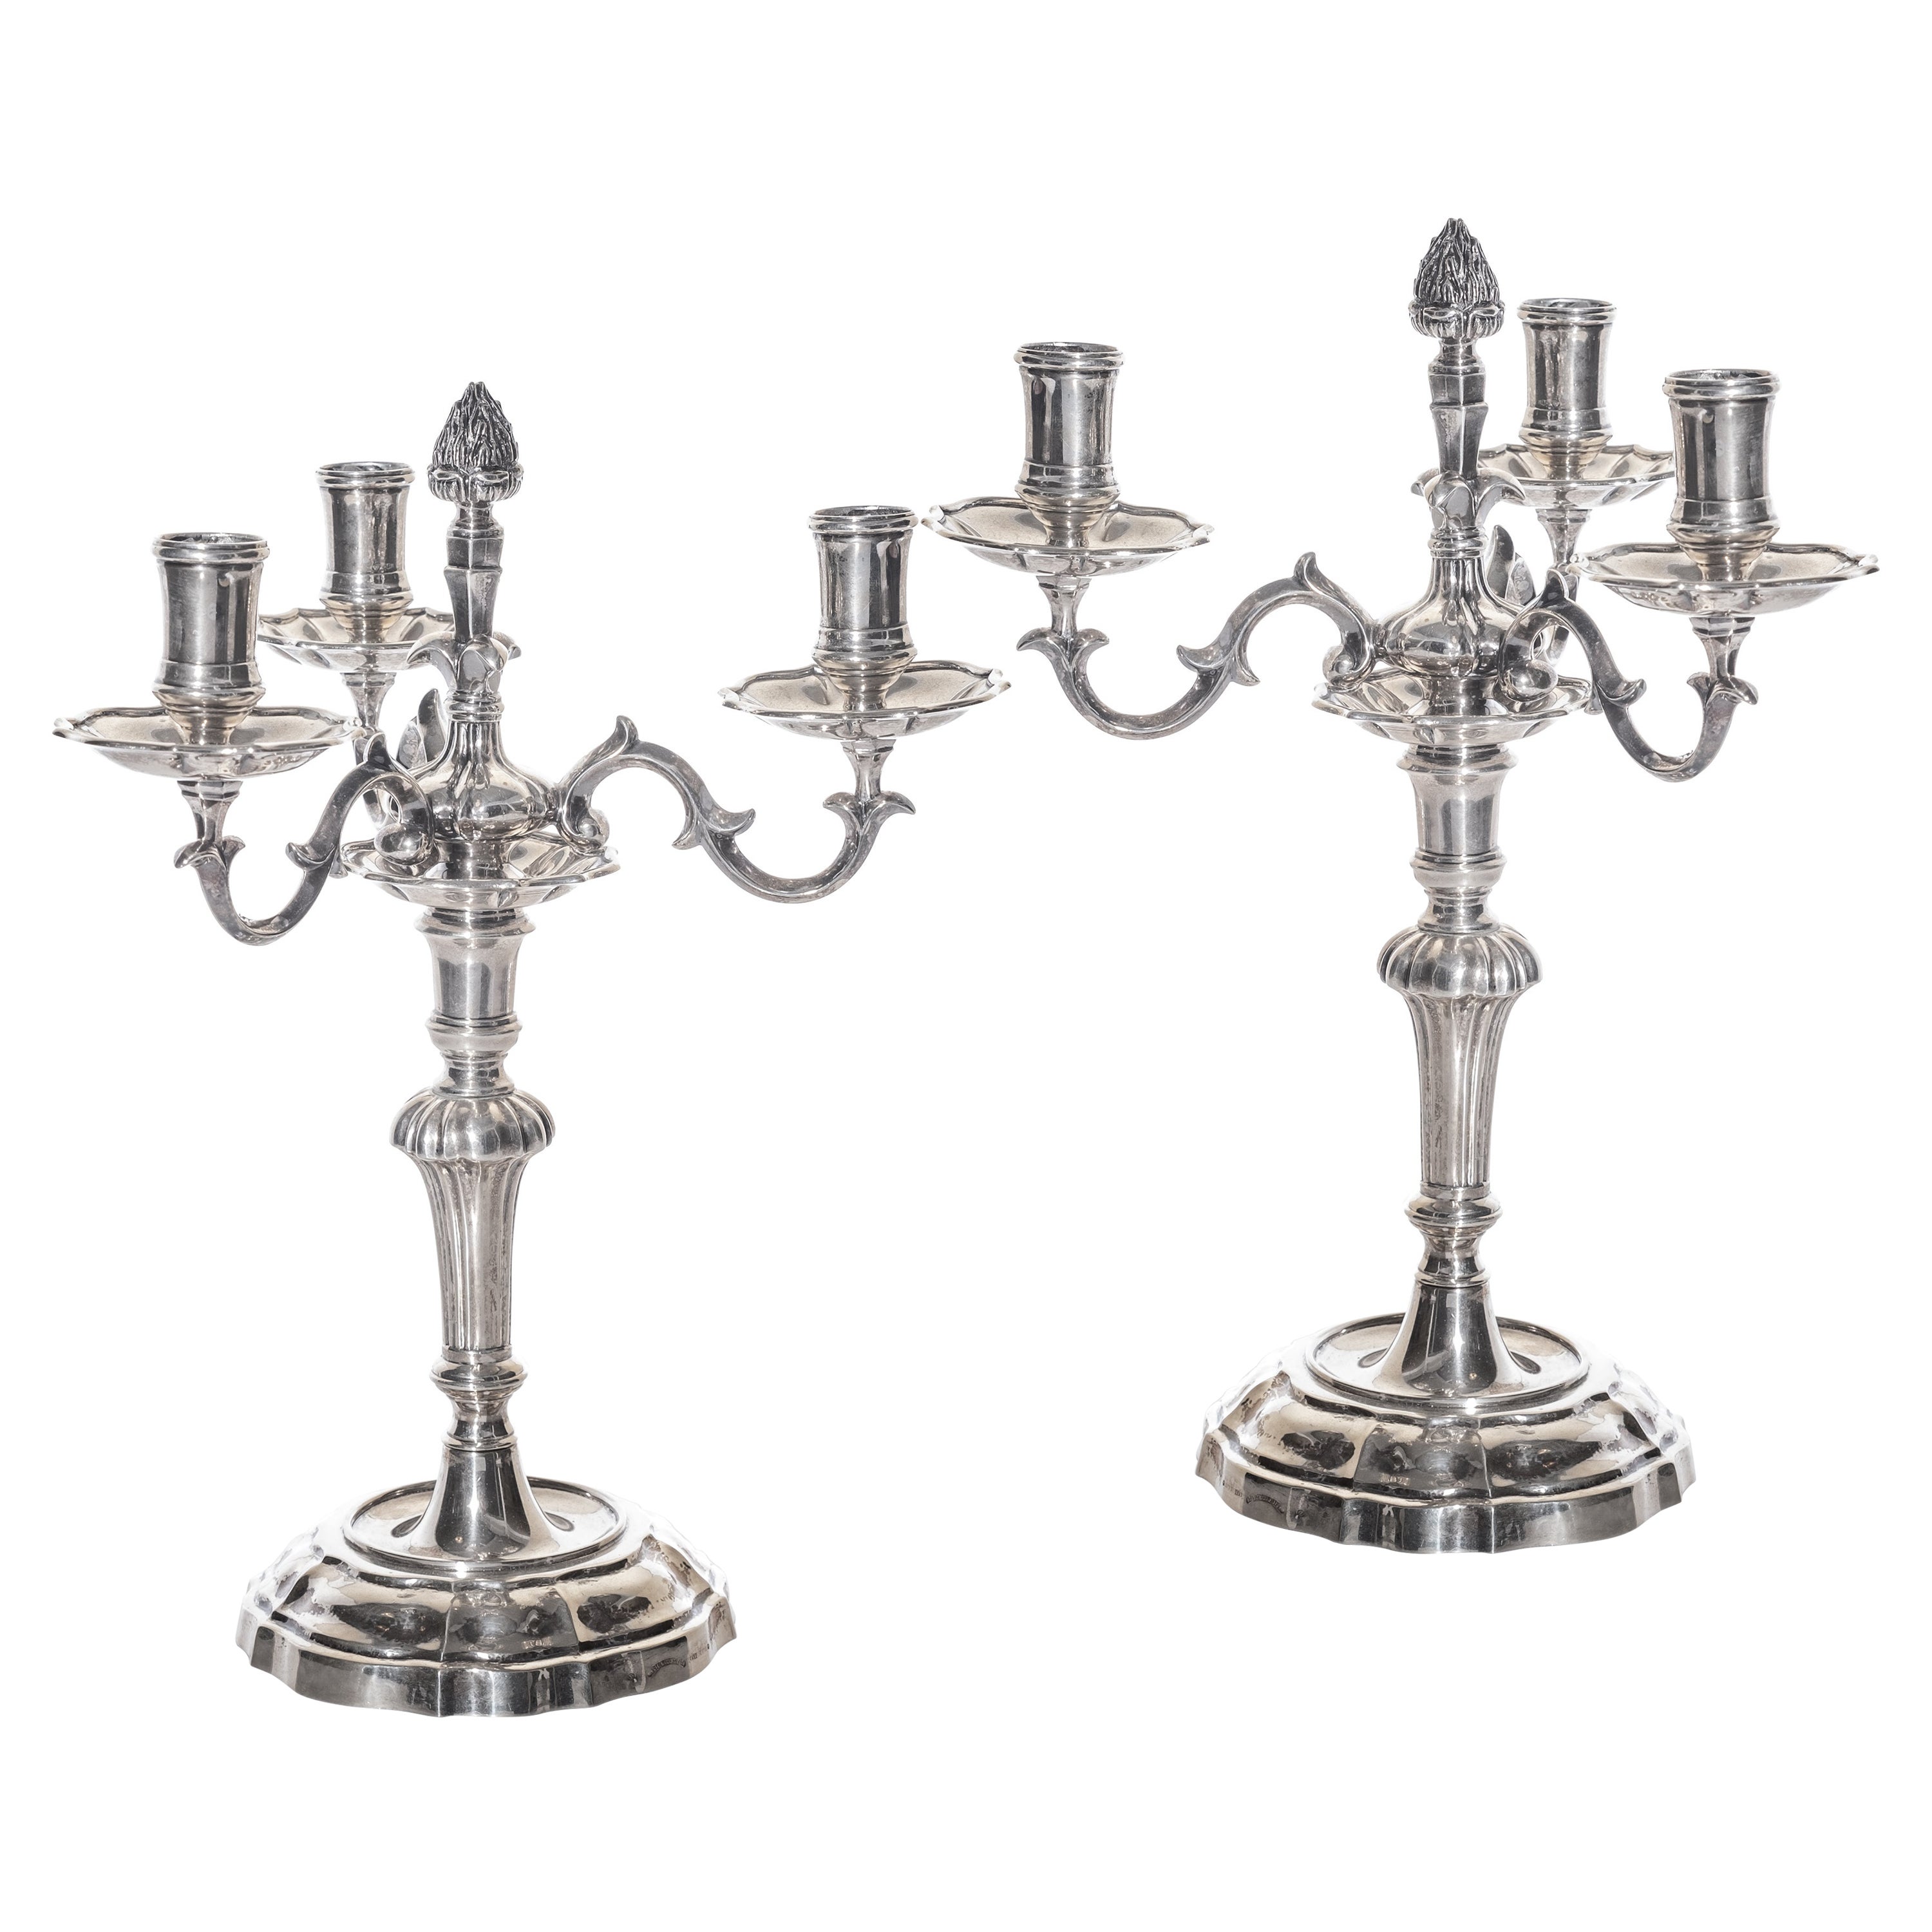 Pair of Buccellati Signed Italian Silver Candelabras